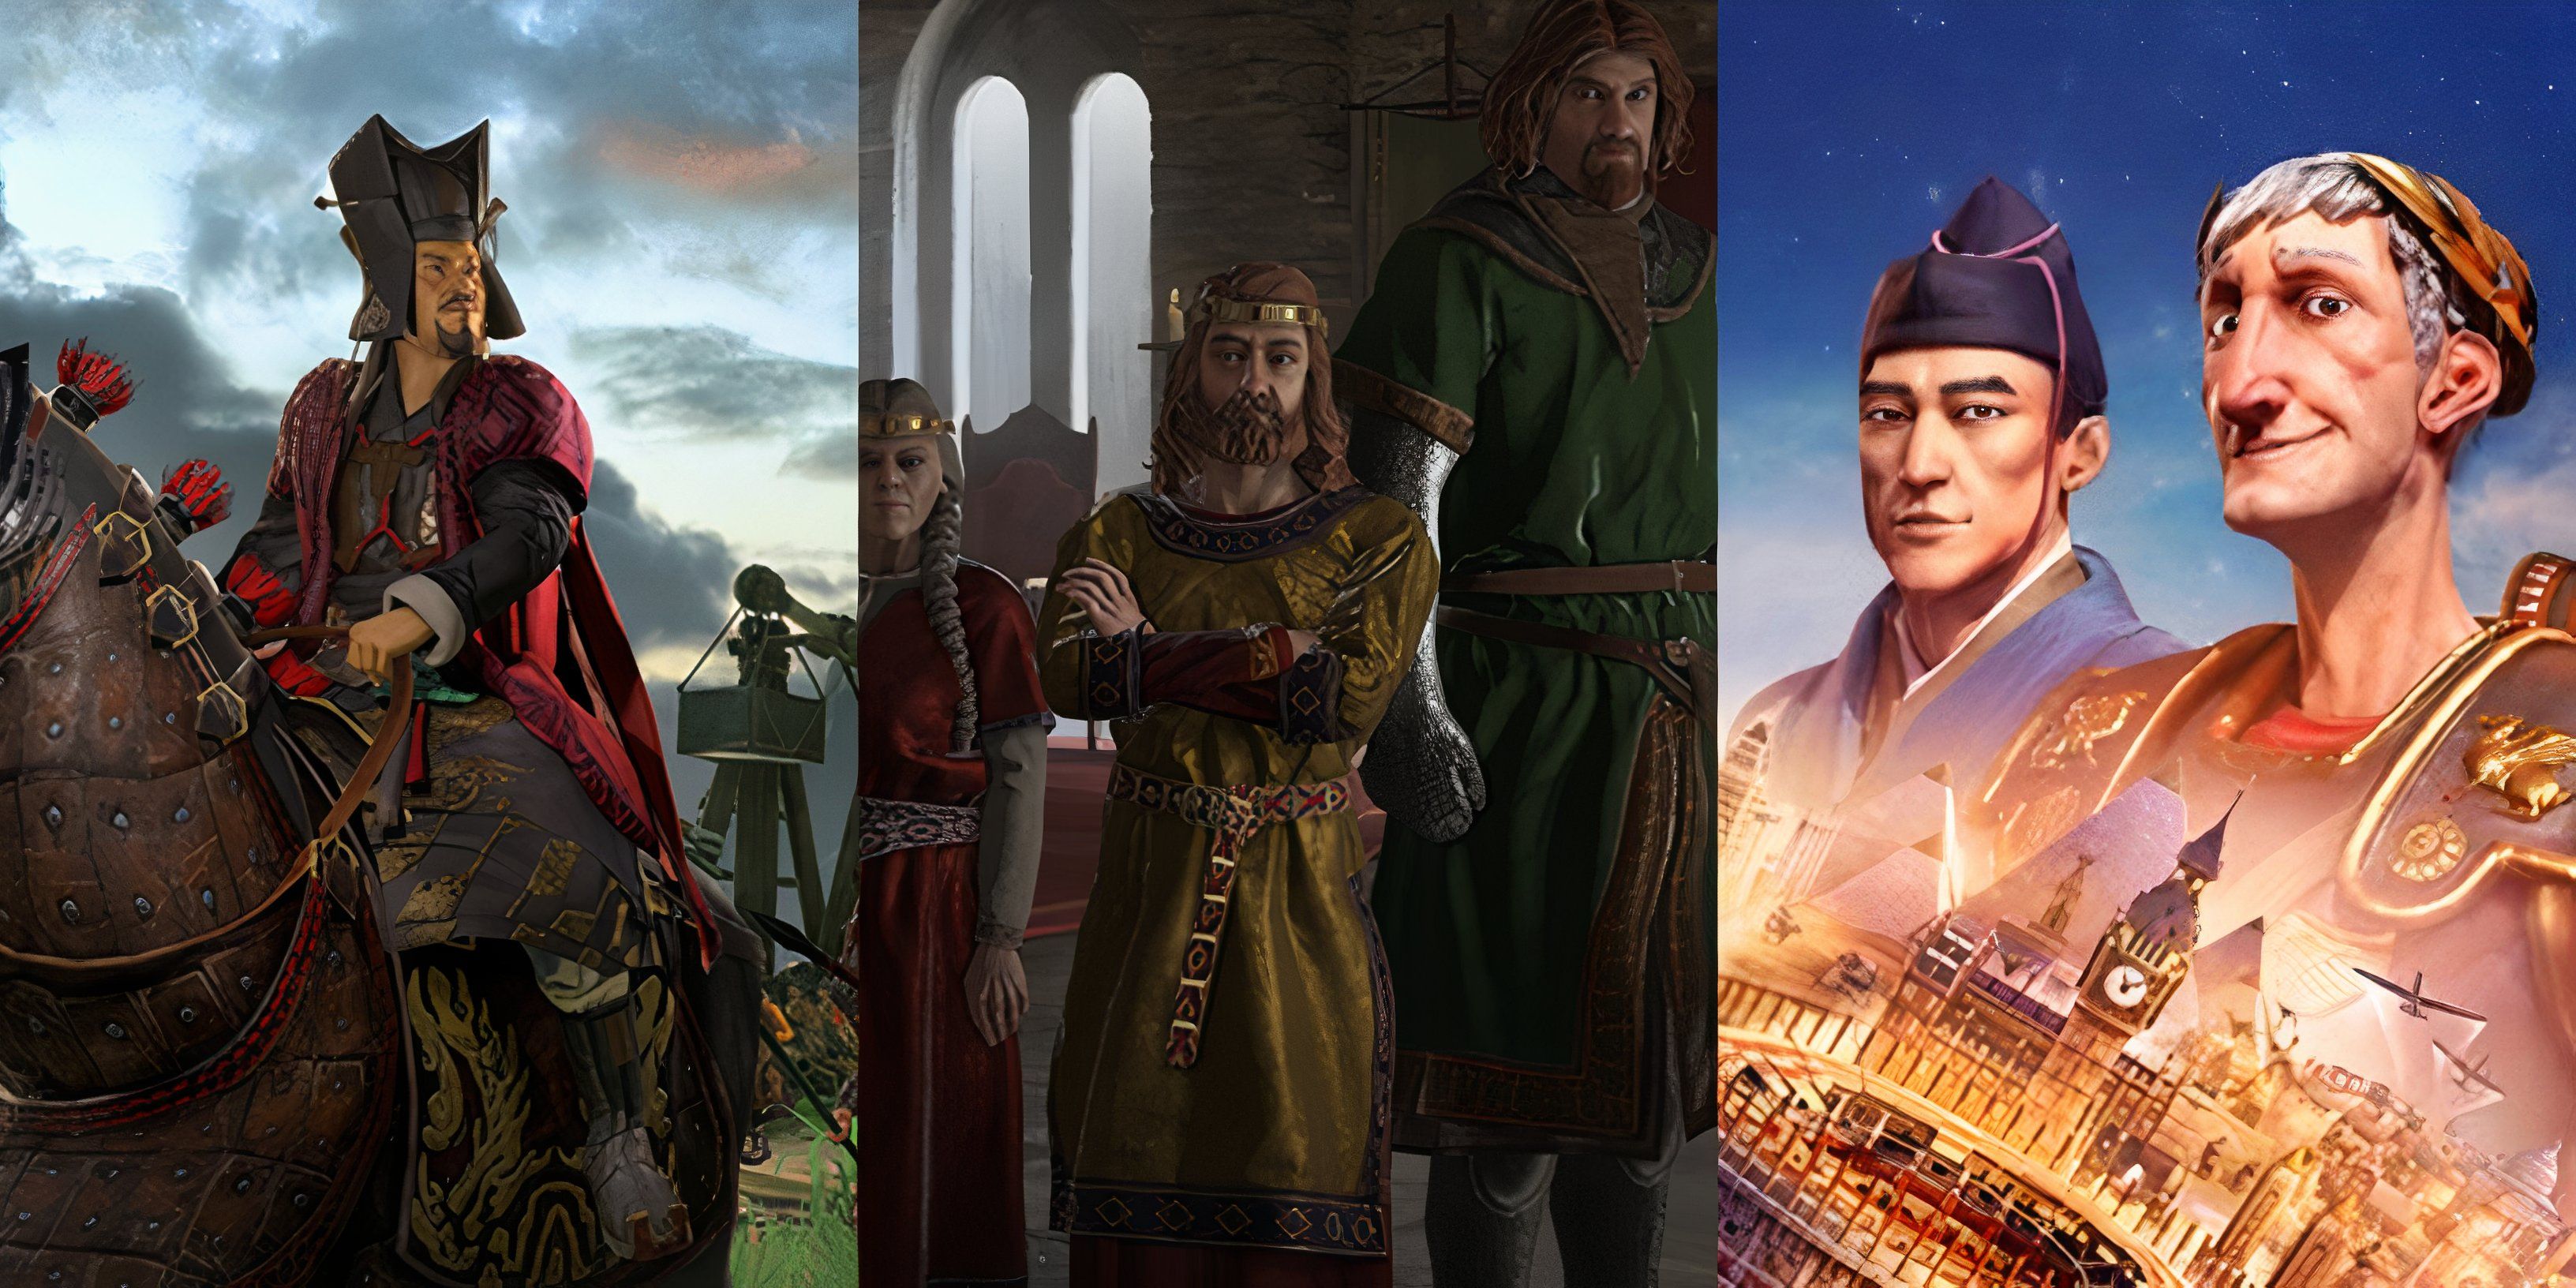 Total War: Three Kingdoms (left), Crusader Kings III (middle), and Civilization VI (right)